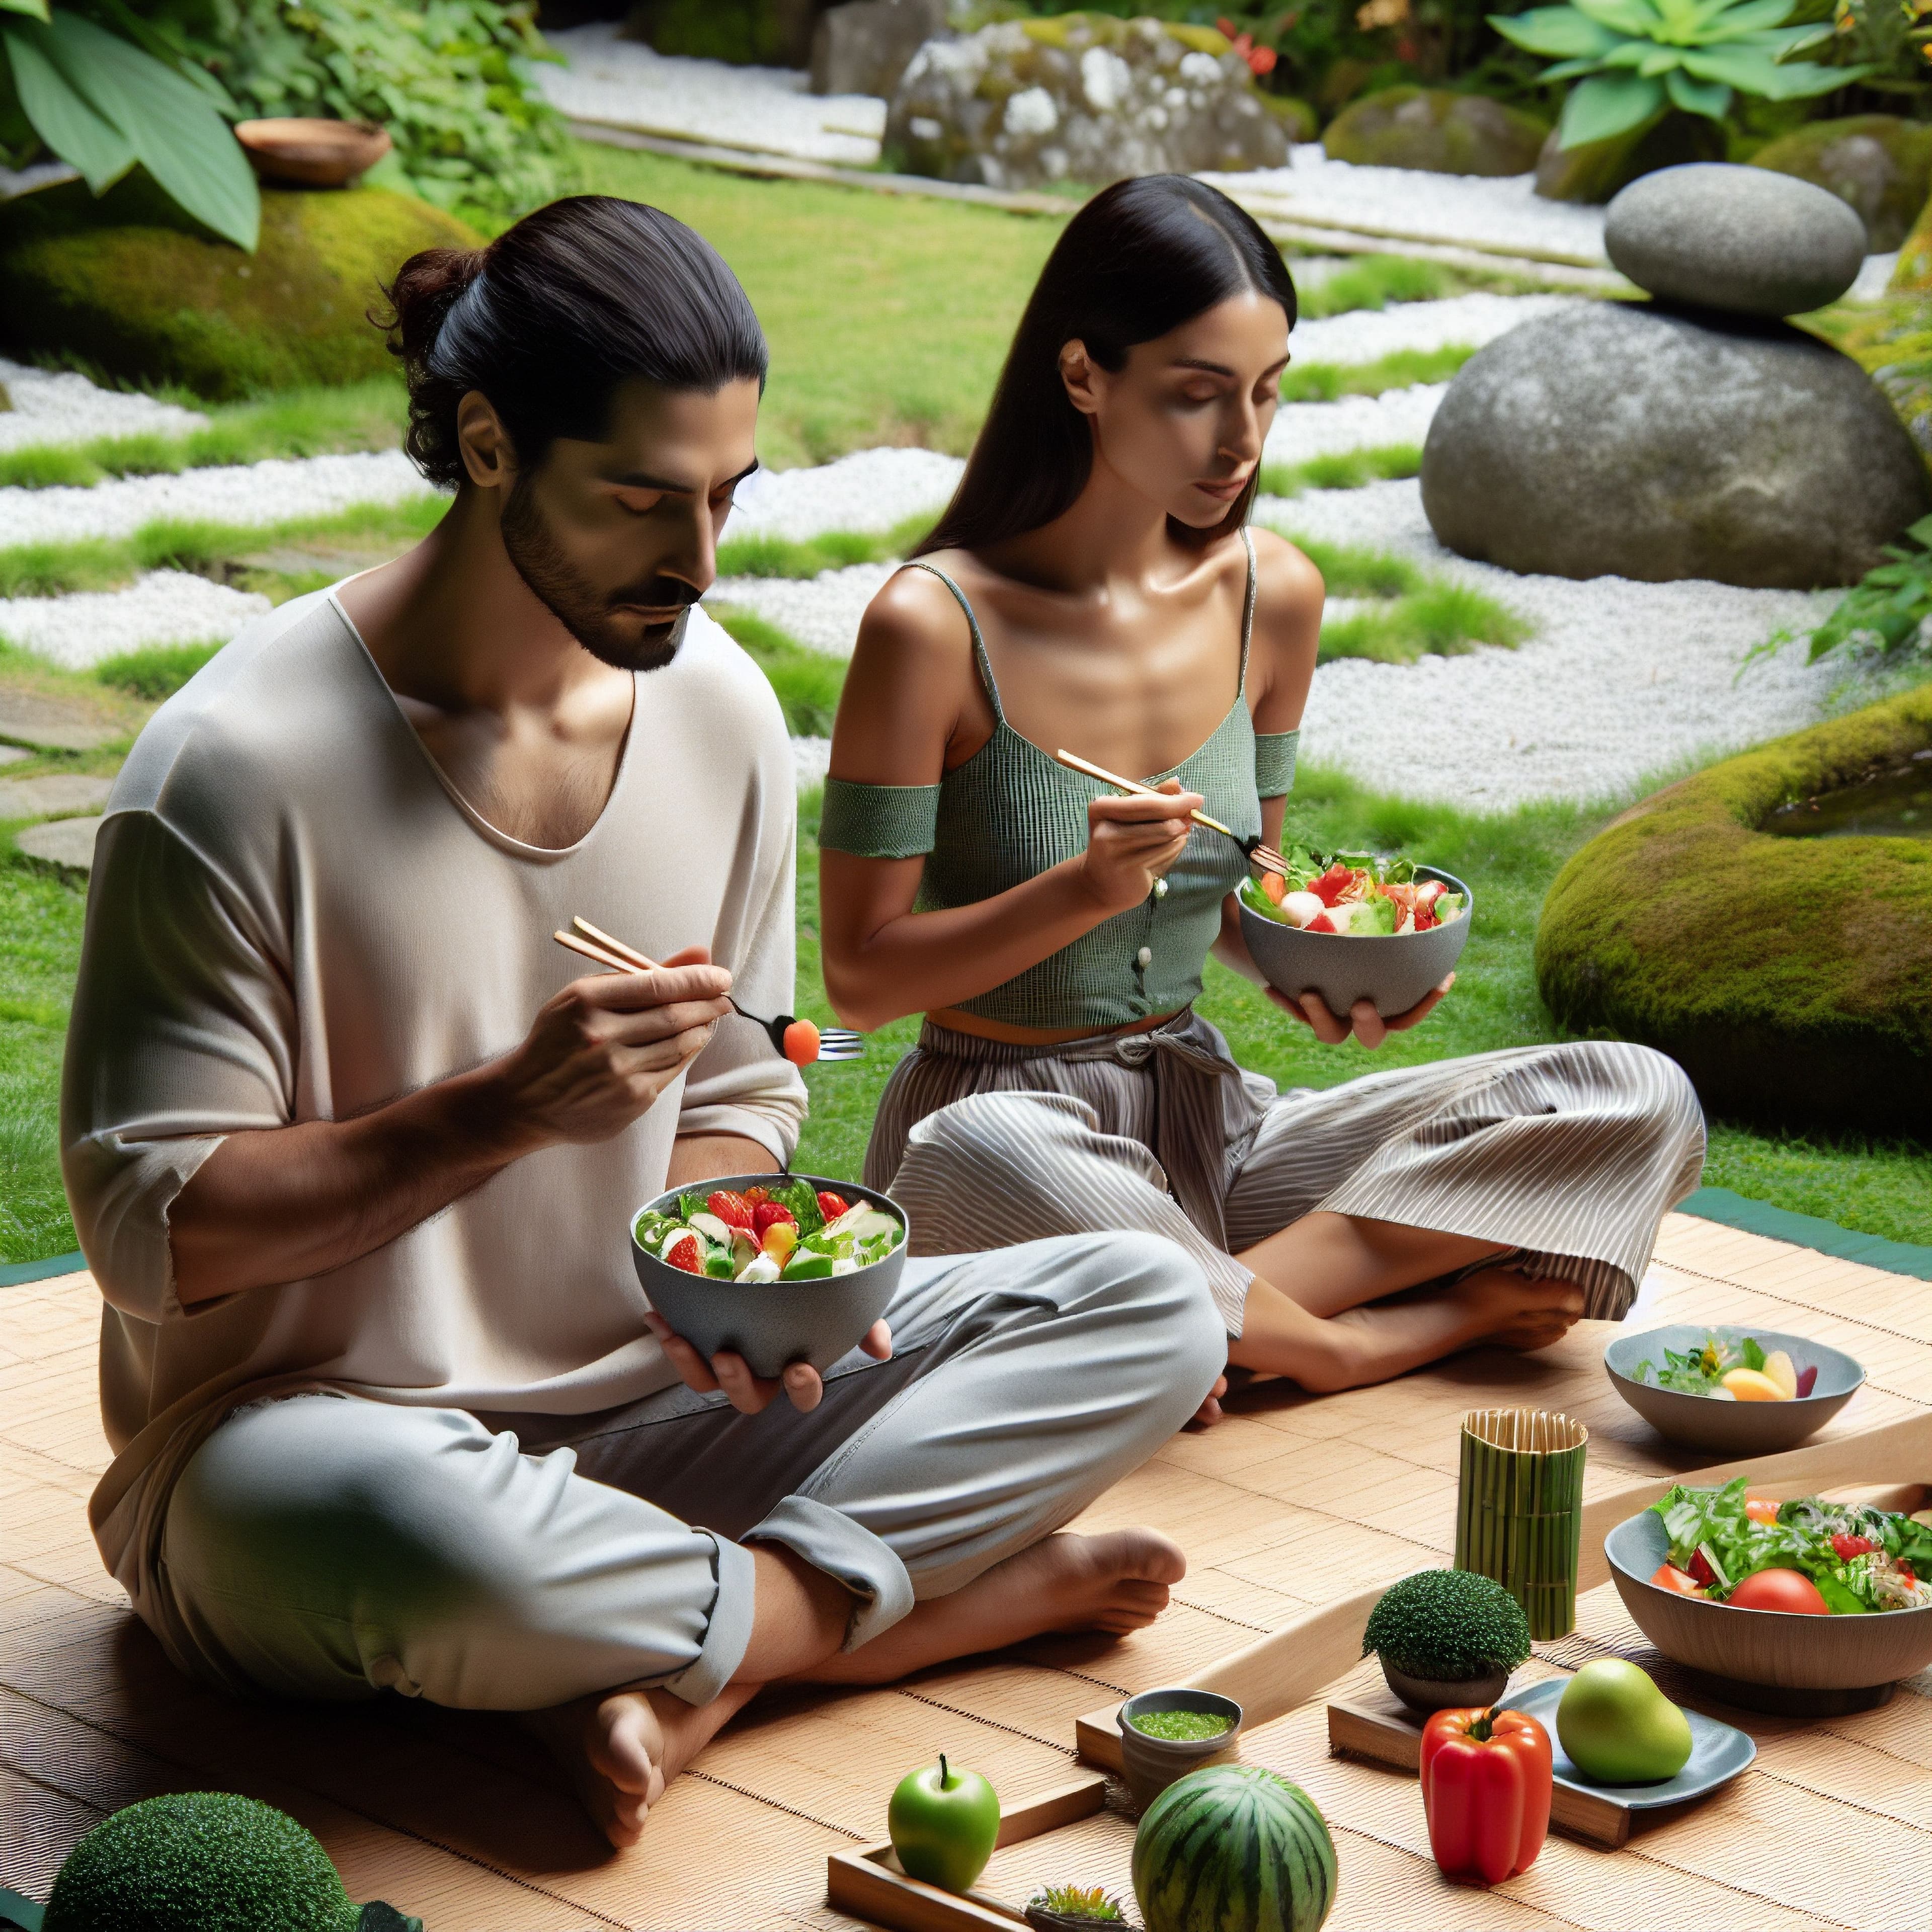 Mindful Eating; The Art of Being Present While Eating